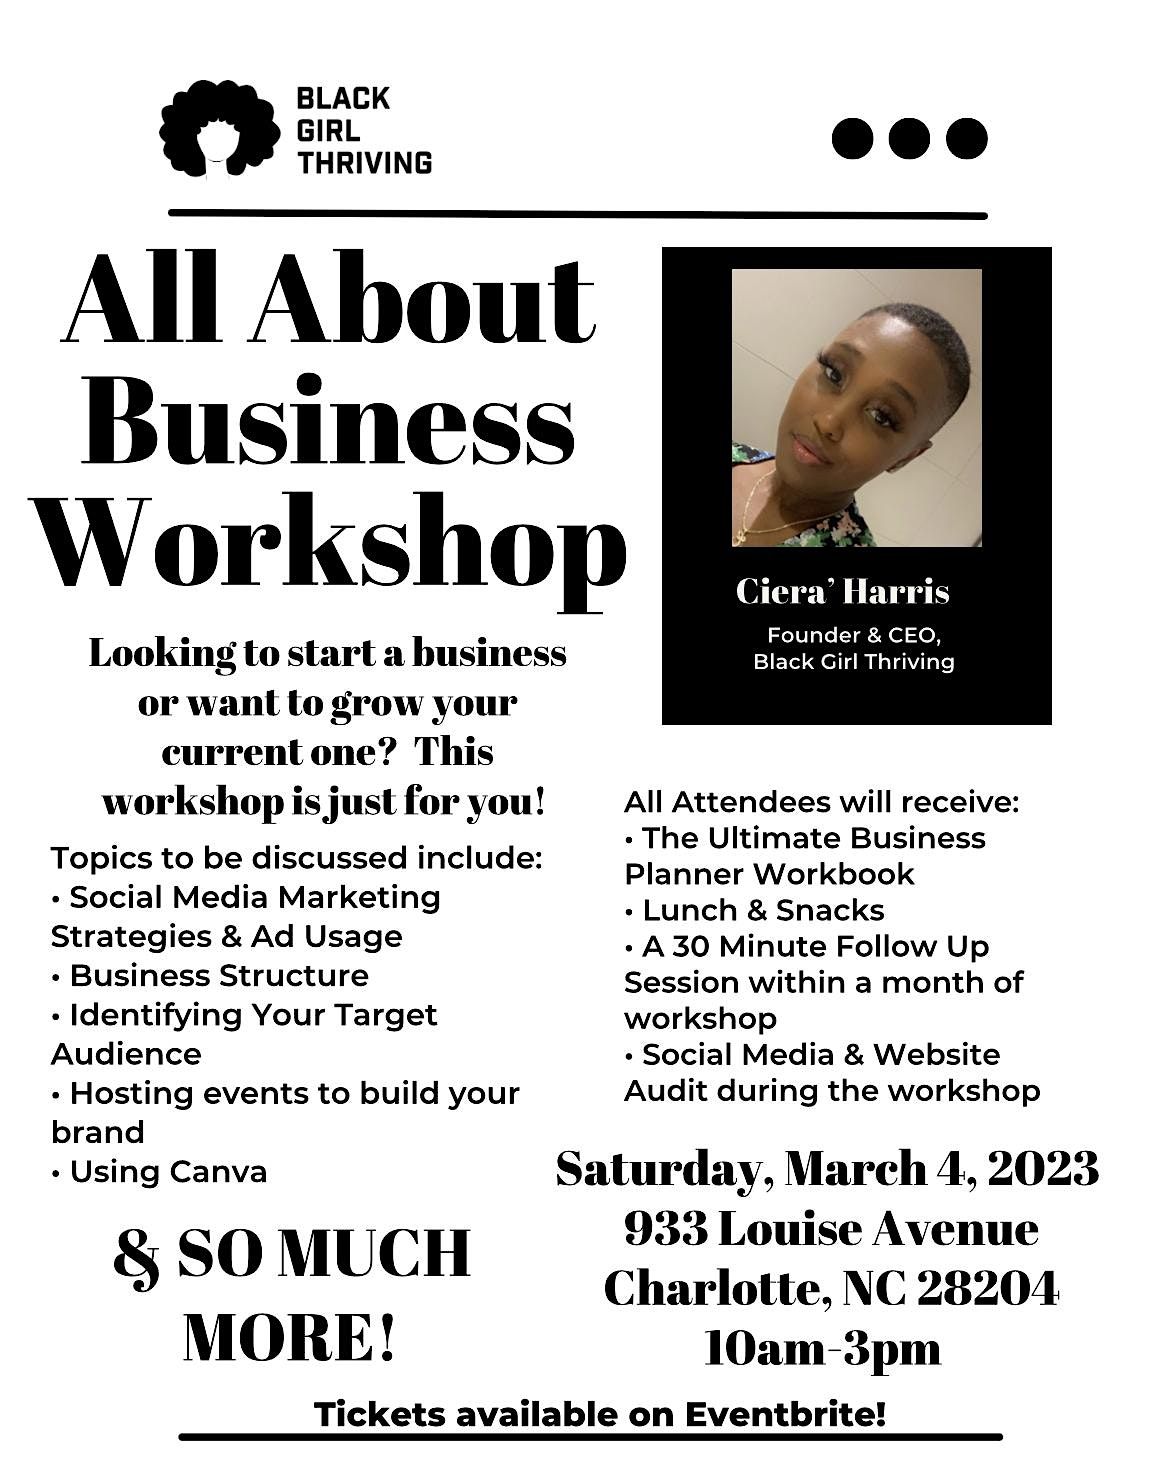 BGT Presents: The All About Business Workshop